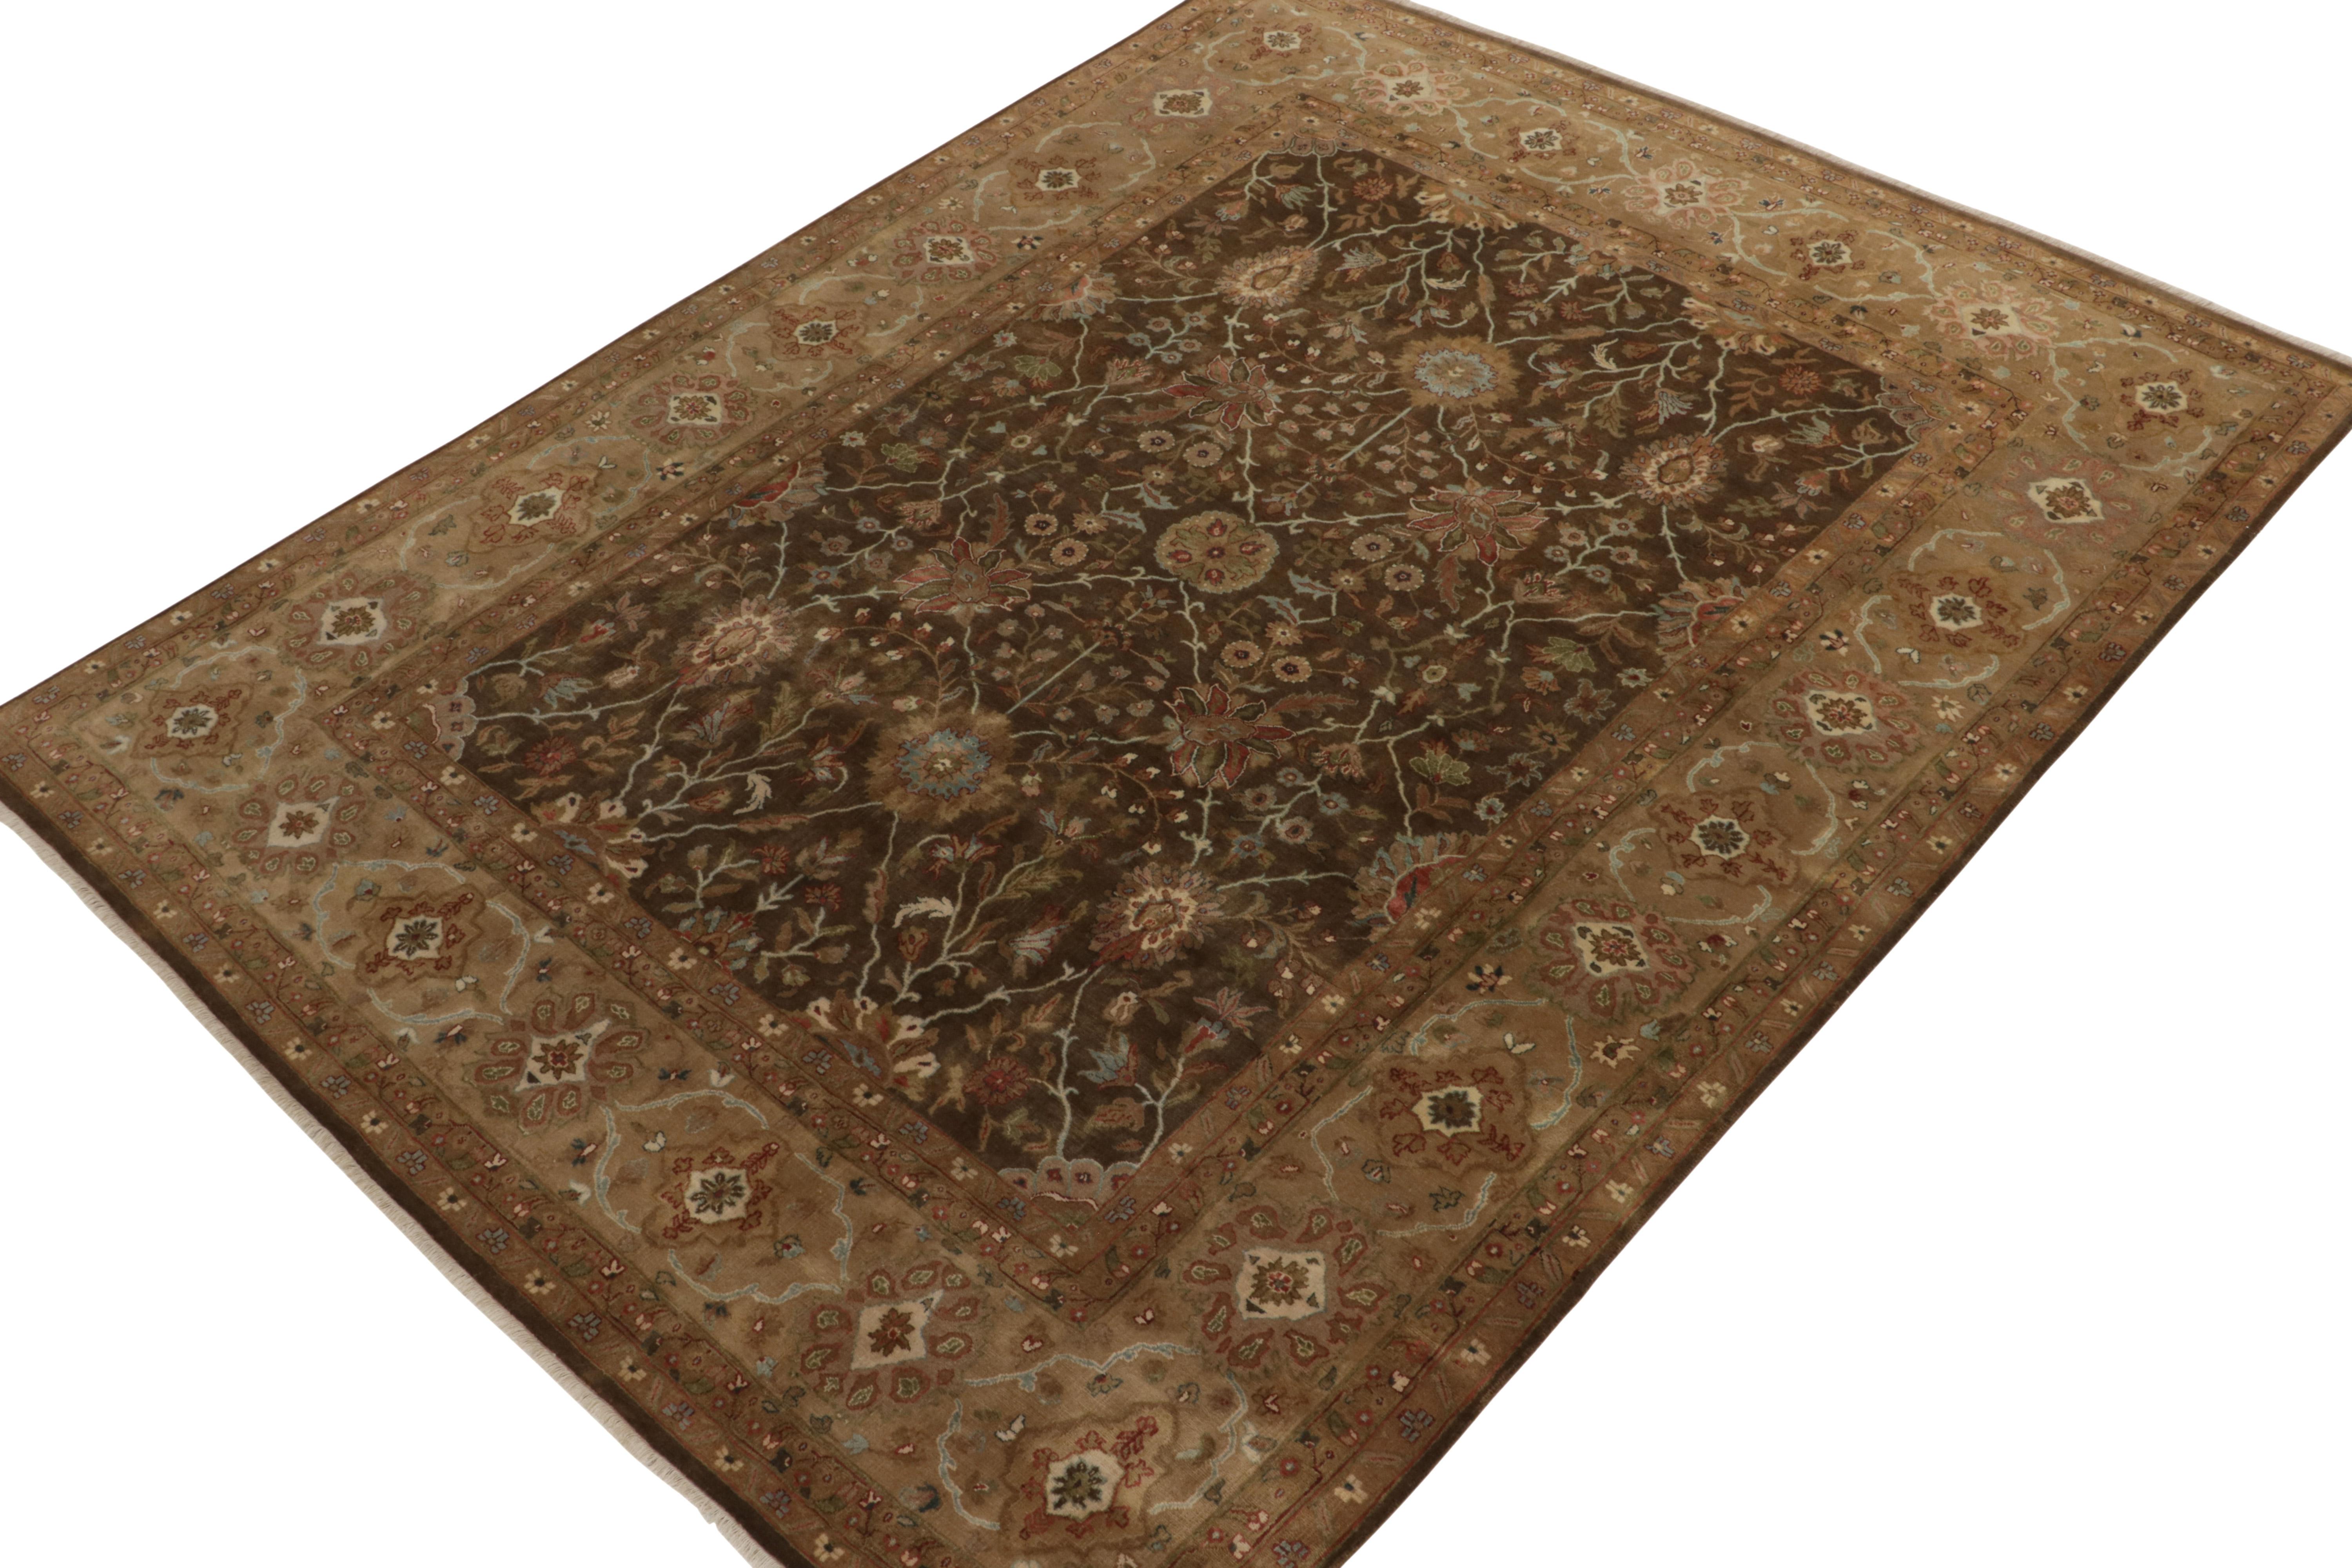 Hand-knotted in wool & silk, this 8x10 from our Modern Classics collection draws inspiration from coveted antique Tabriz rug designs. 

On the Design: The gracious scale enjoys all over floral patterns in rich brown and beige with subtle blue and